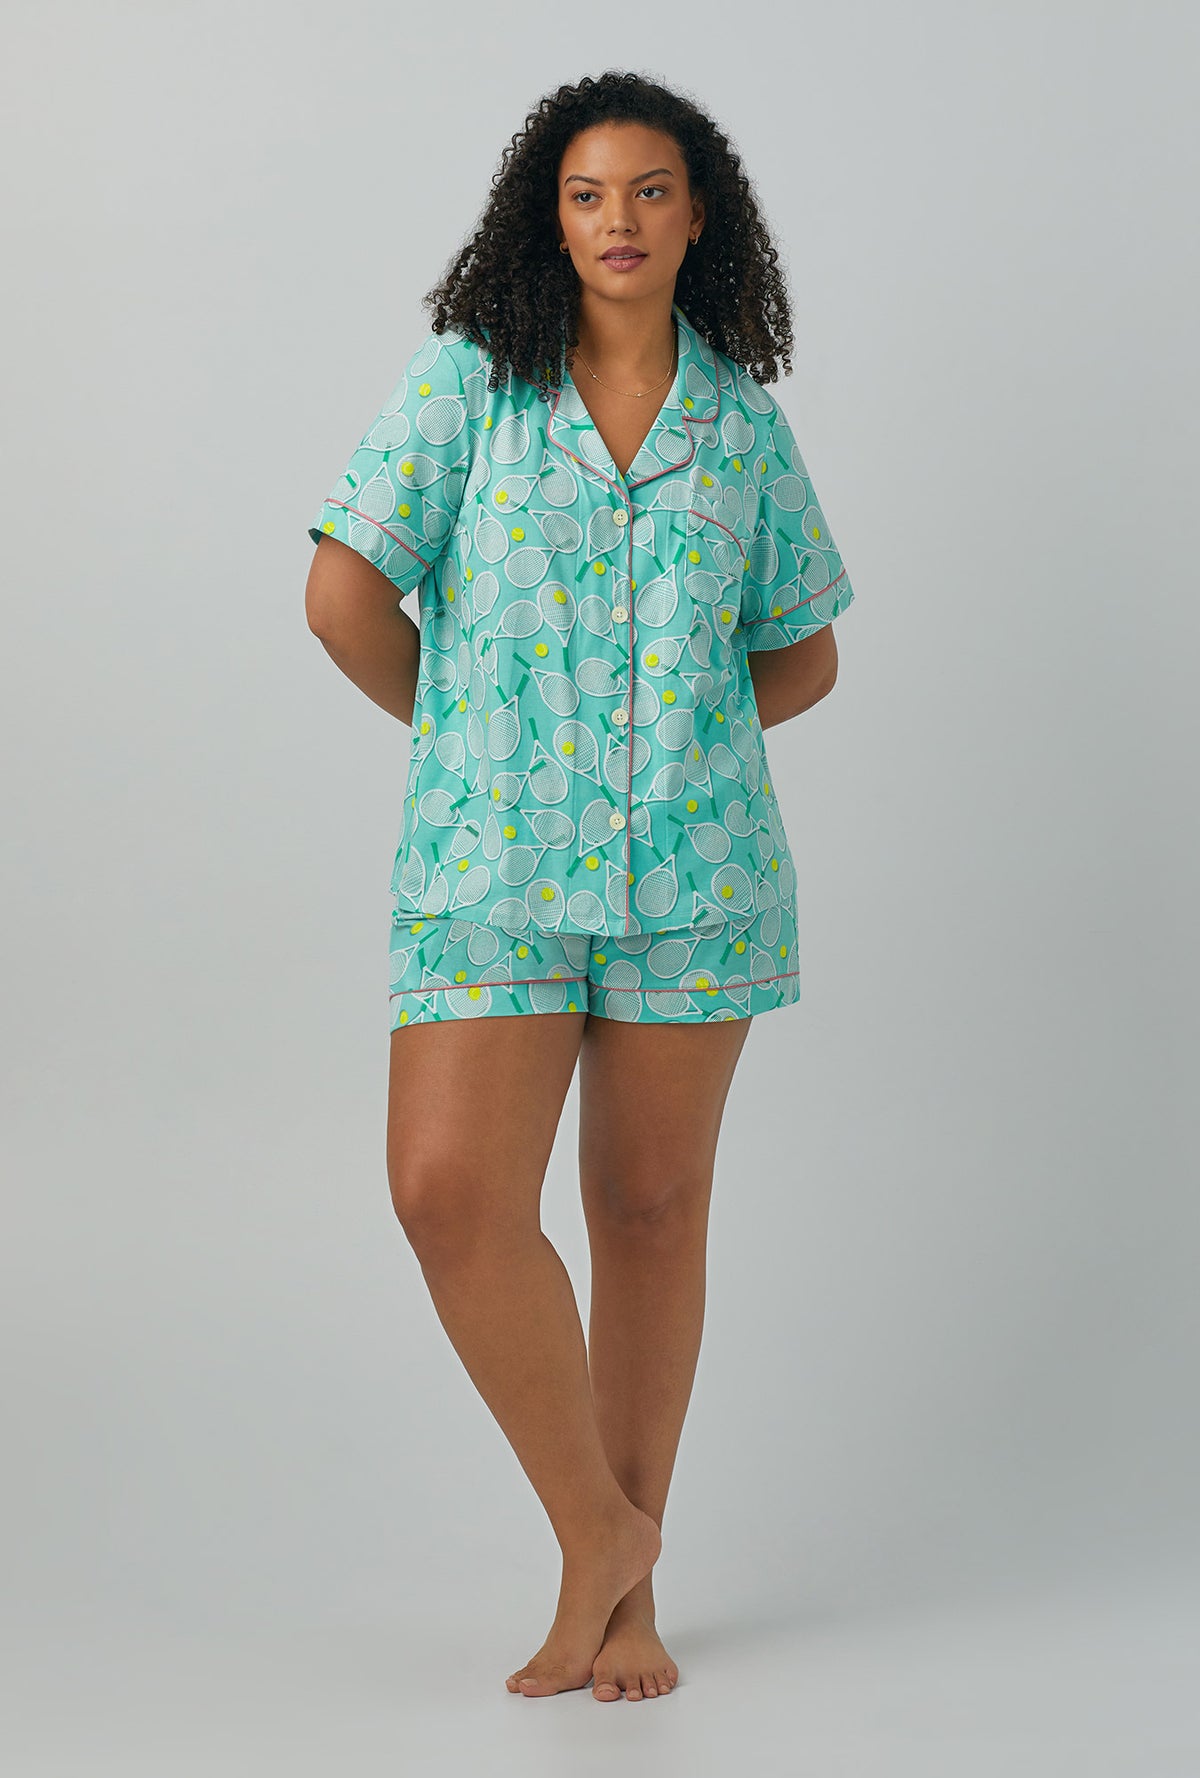 A lady wearing plus size green Short Sleeve Classic Shorty Stretch Jersey PJ Set with Tennis Club print